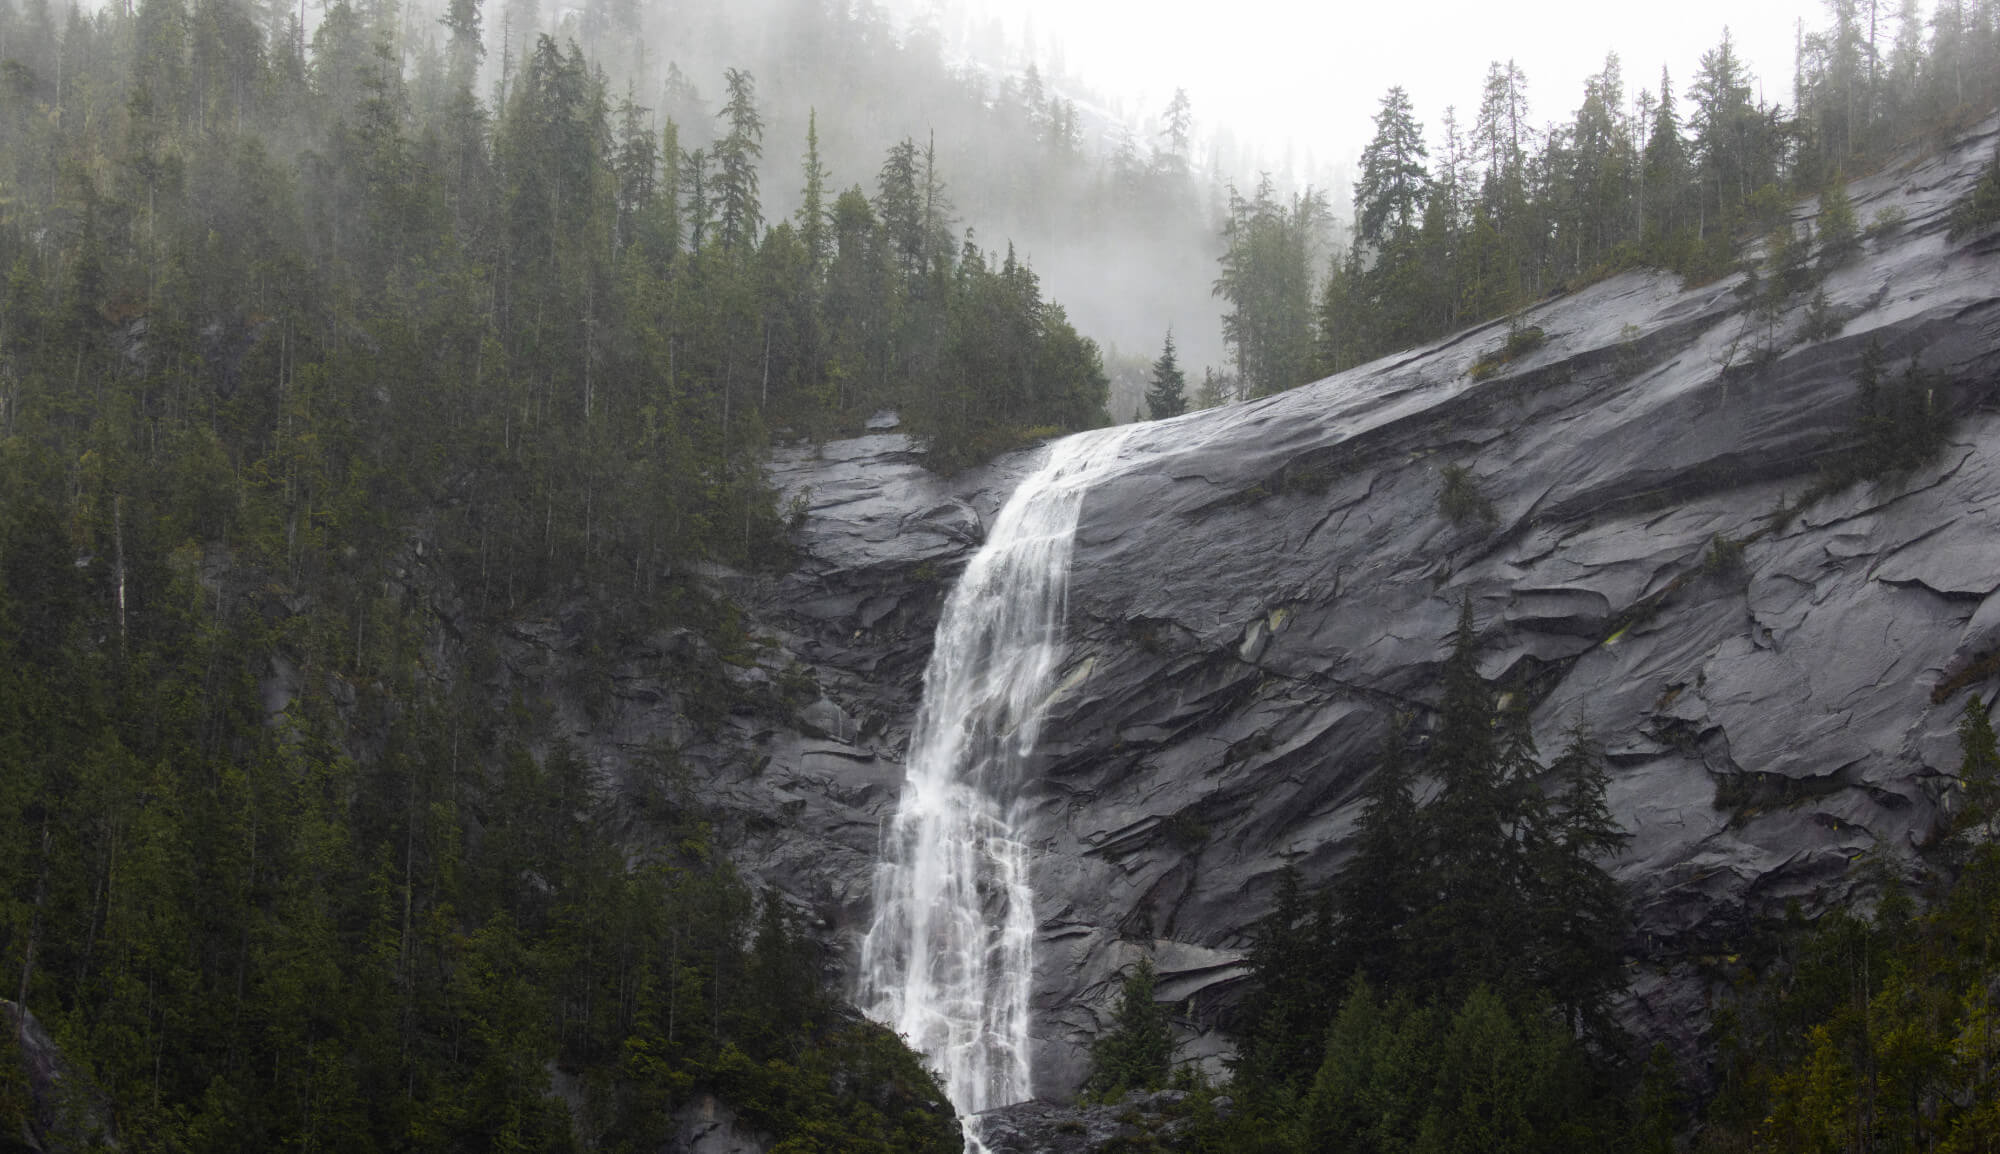 Large rock face with waterfall running down it. Forest lines the top and bottom of the image. There is fog in the trees.